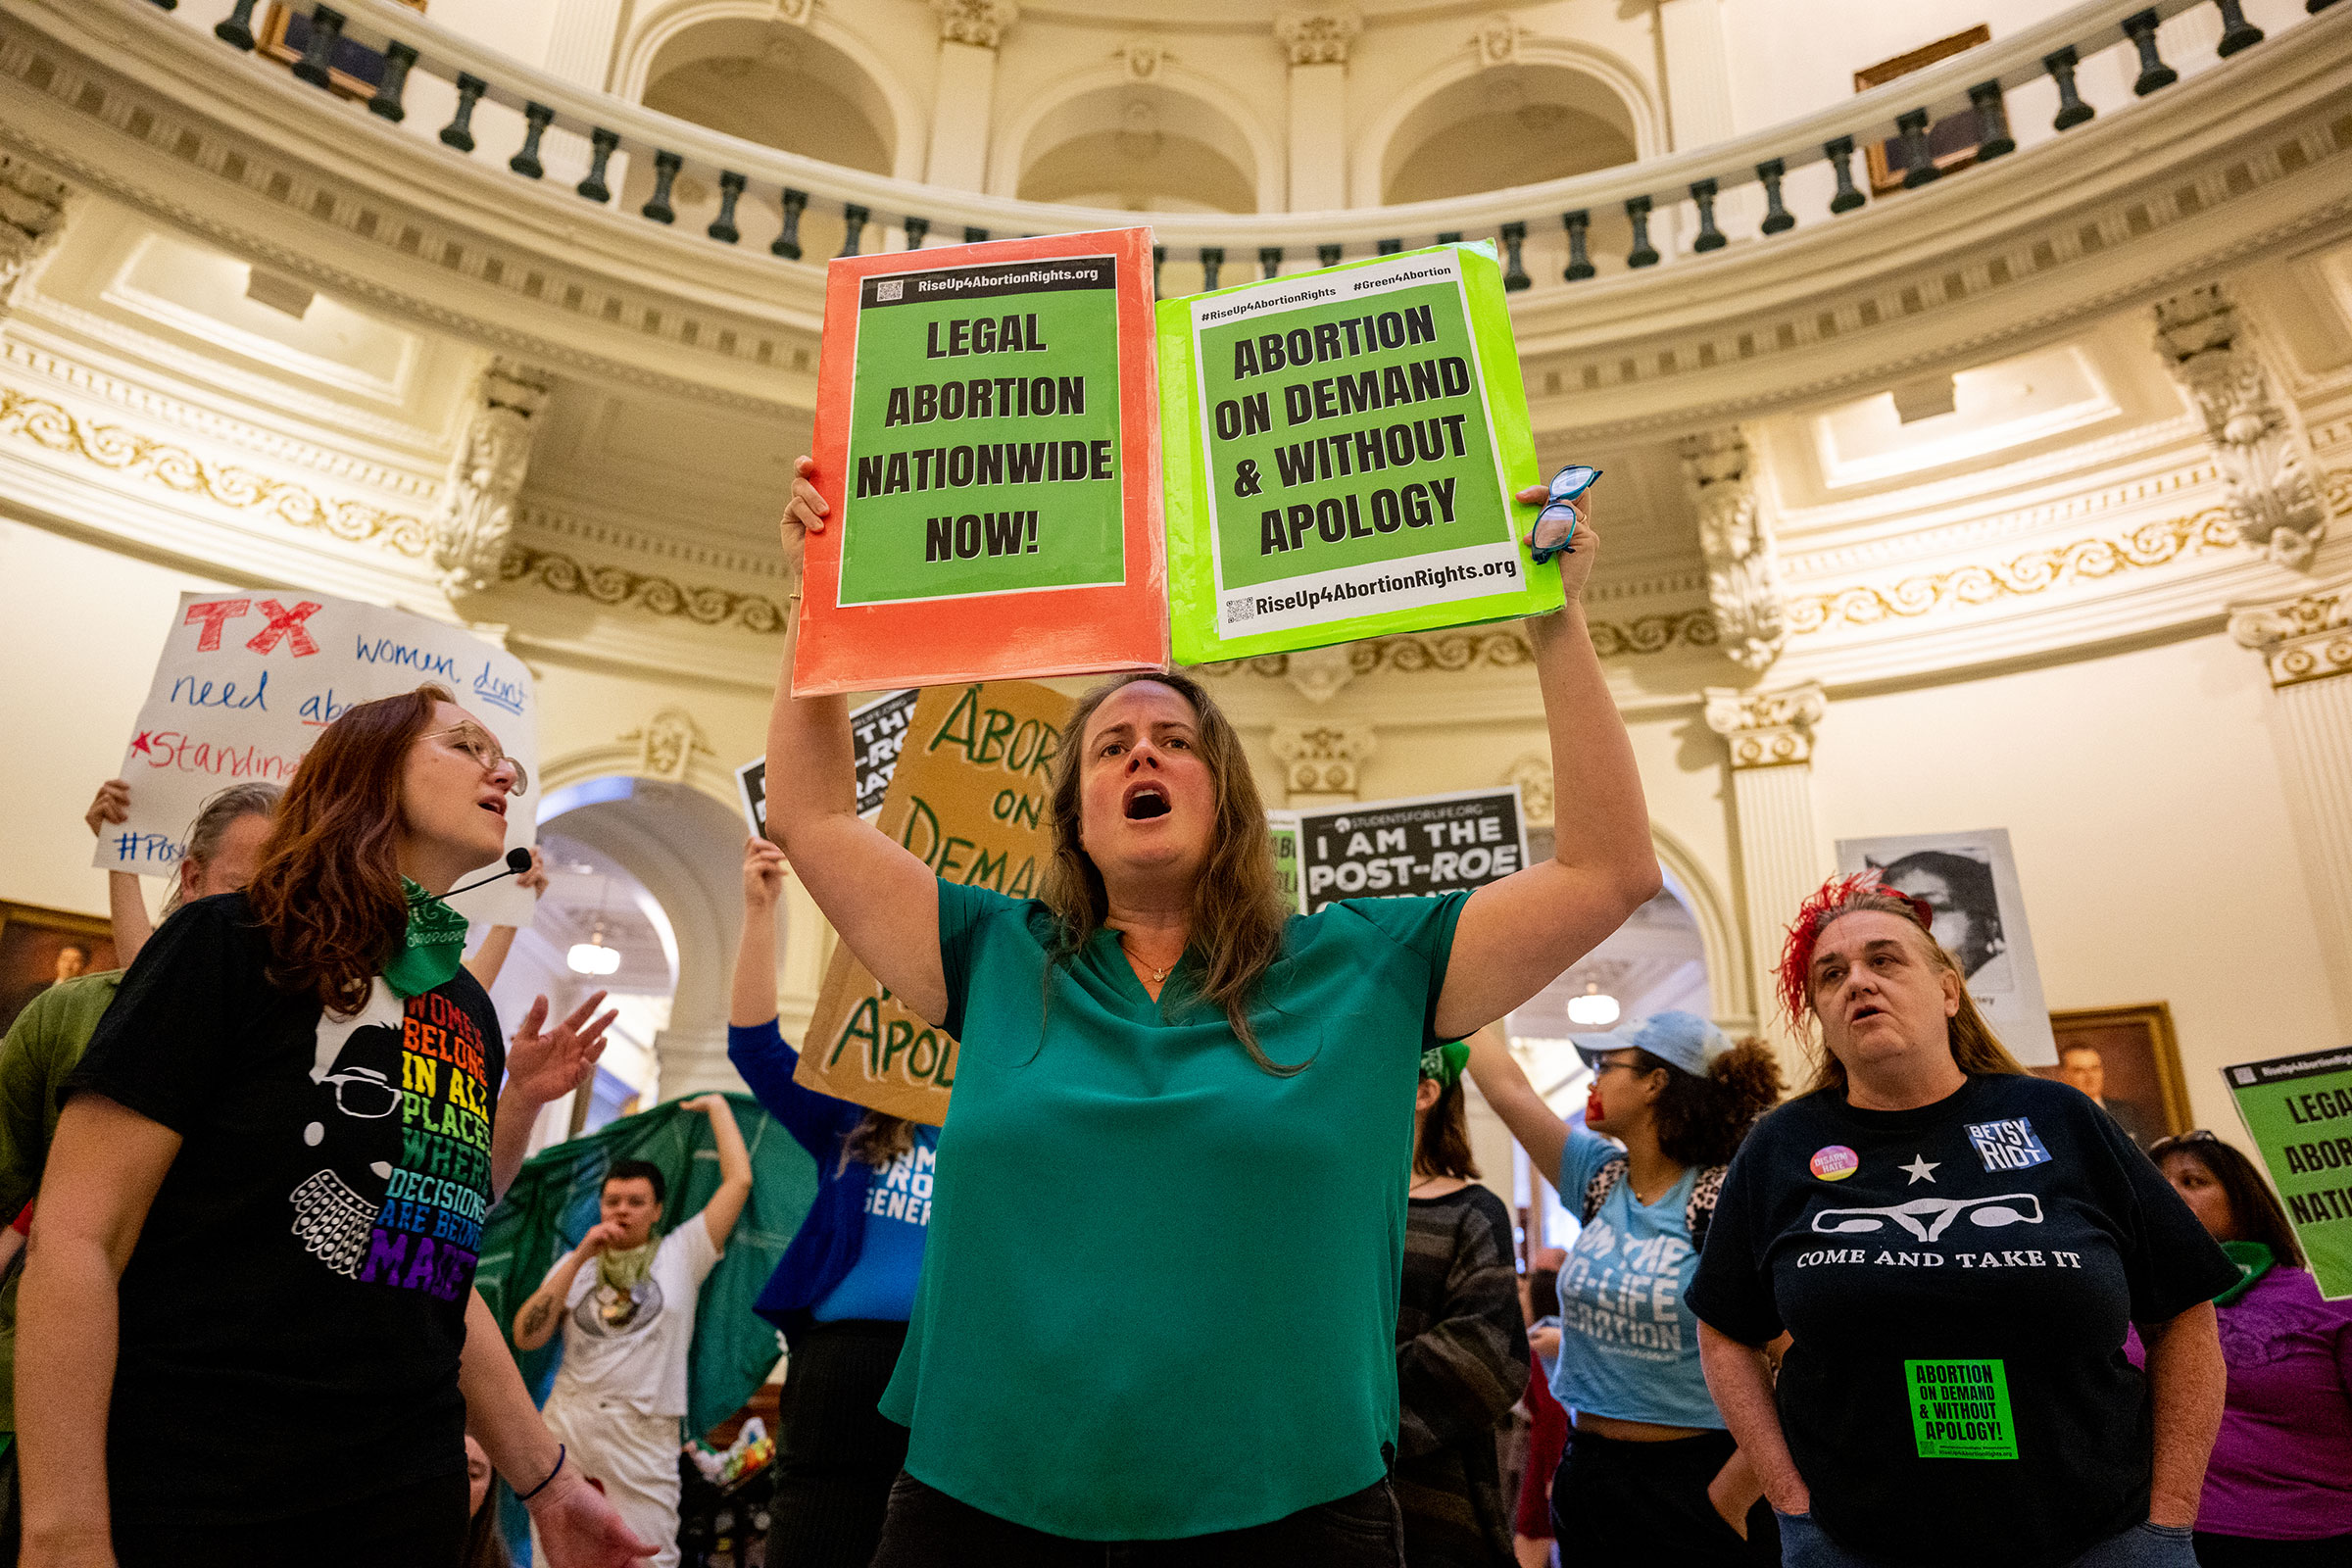 Abortion rights activist Rachel Bailey chants during an International Women's Day abortion rights demonstration at the Texas State Capitol in Austin on March 8, 2023.